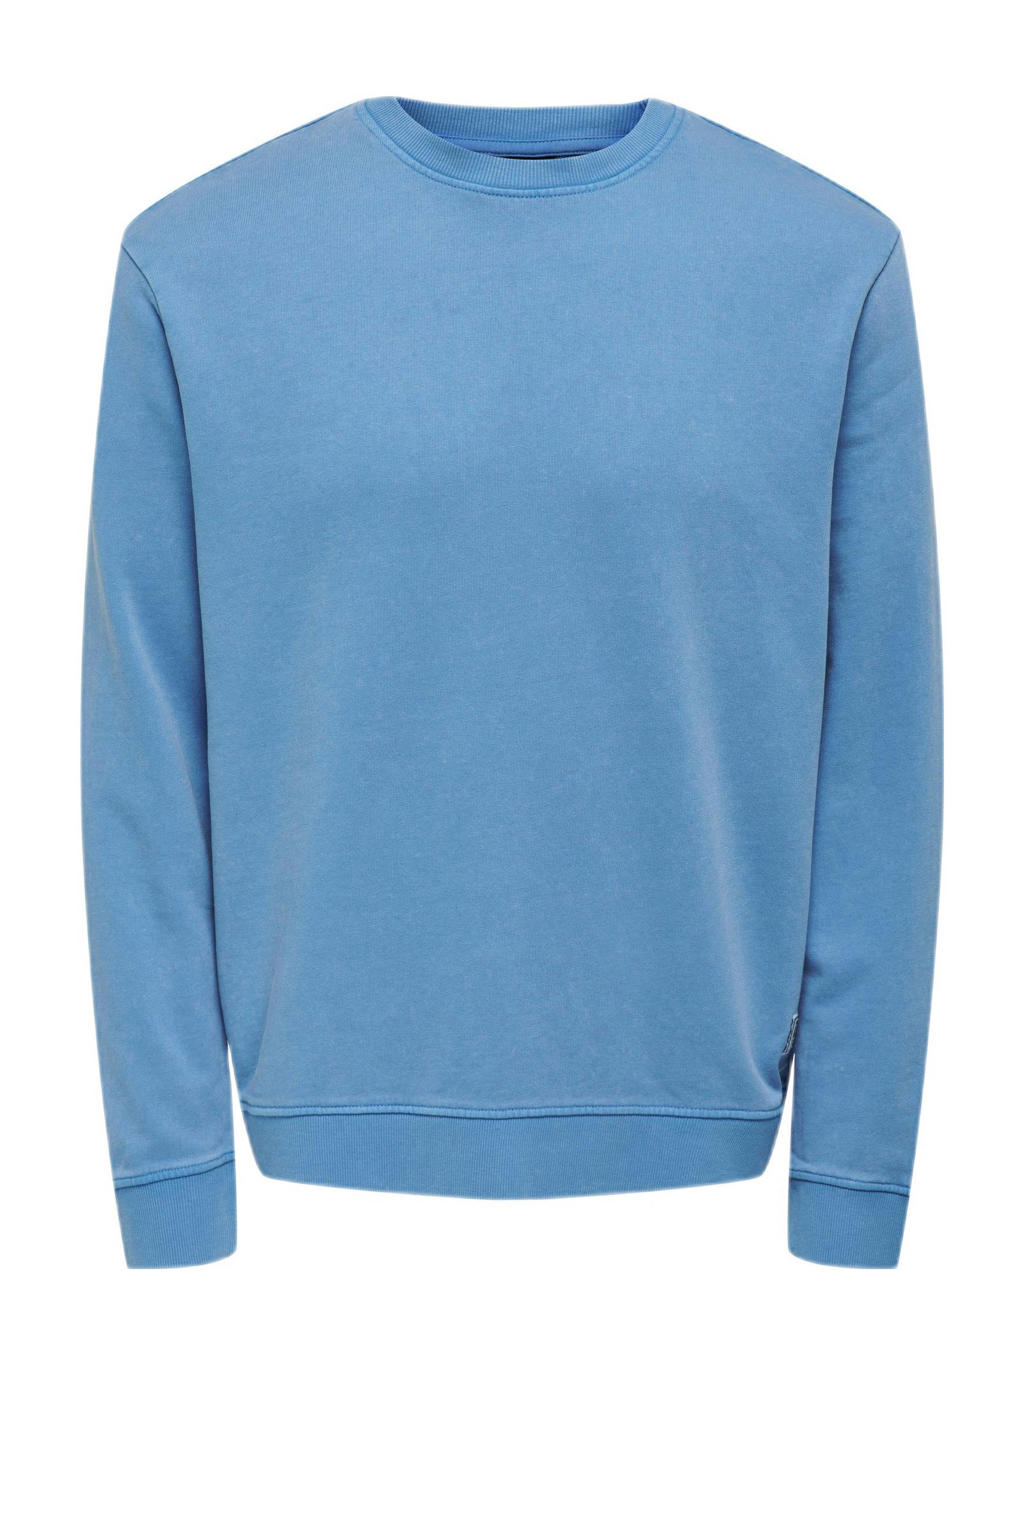 ONLY & SONS sweater ONSRON blissful blue